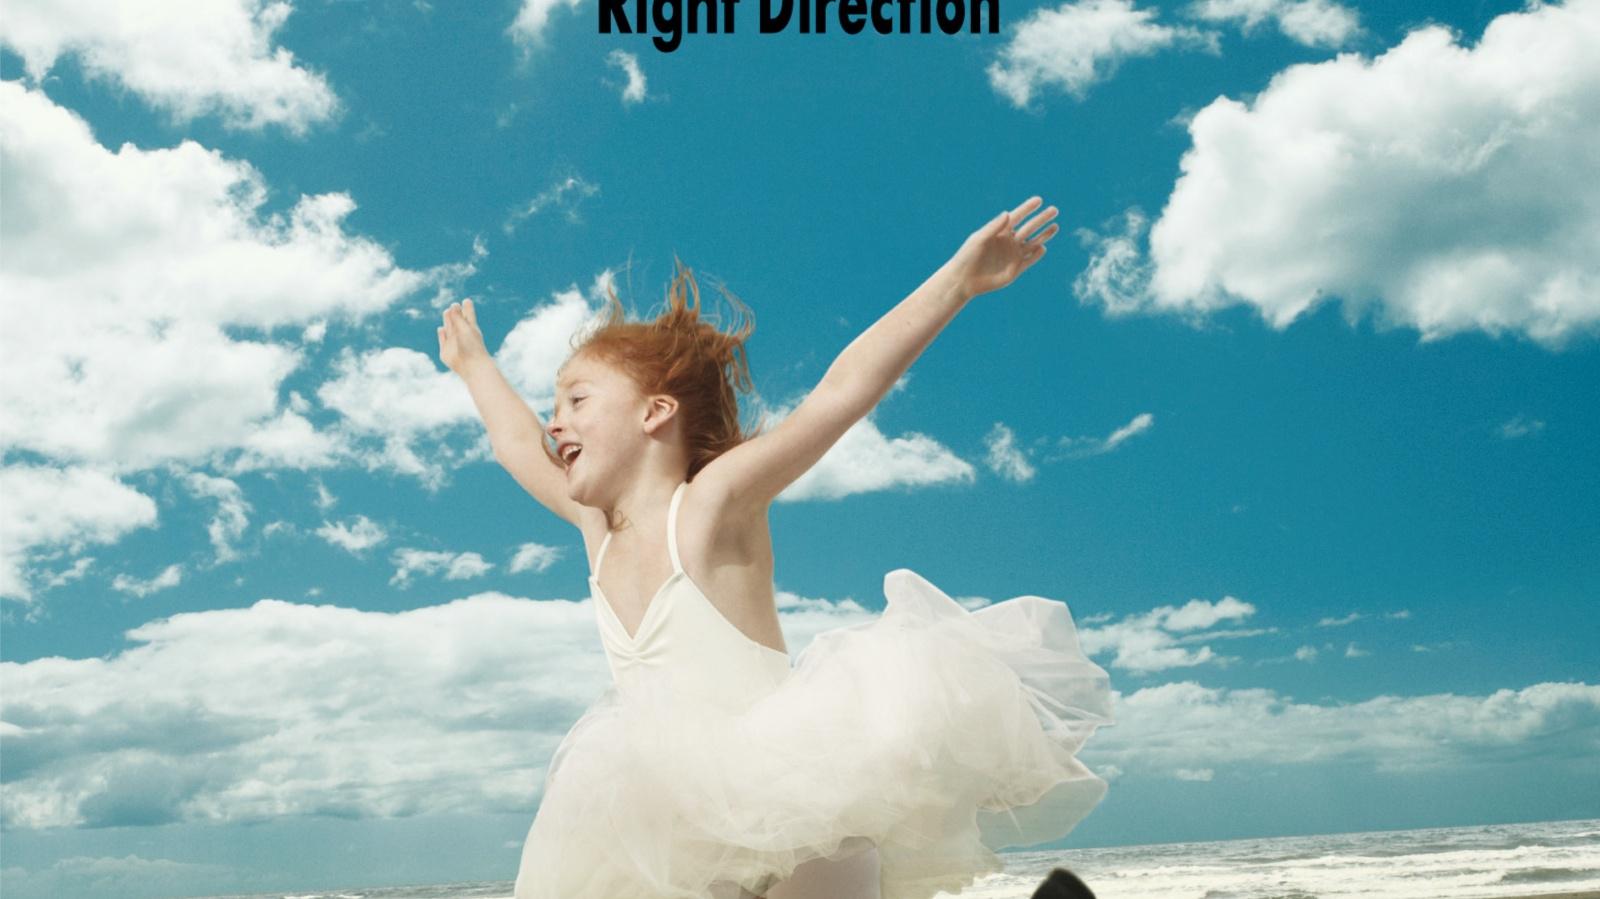 lecca - Right Direction